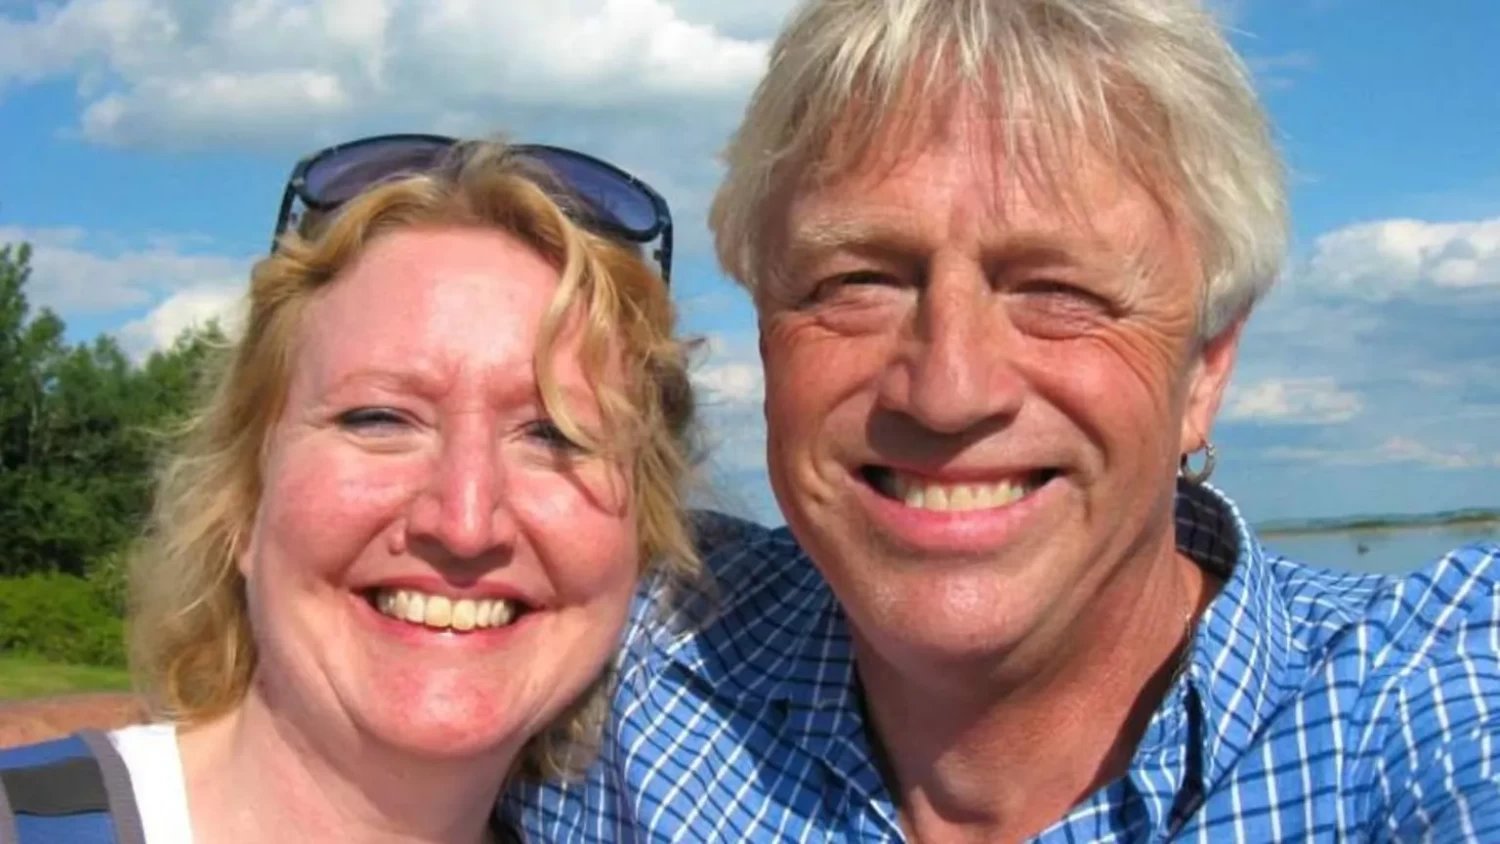 Couple found dead after trying to cross Atlantic